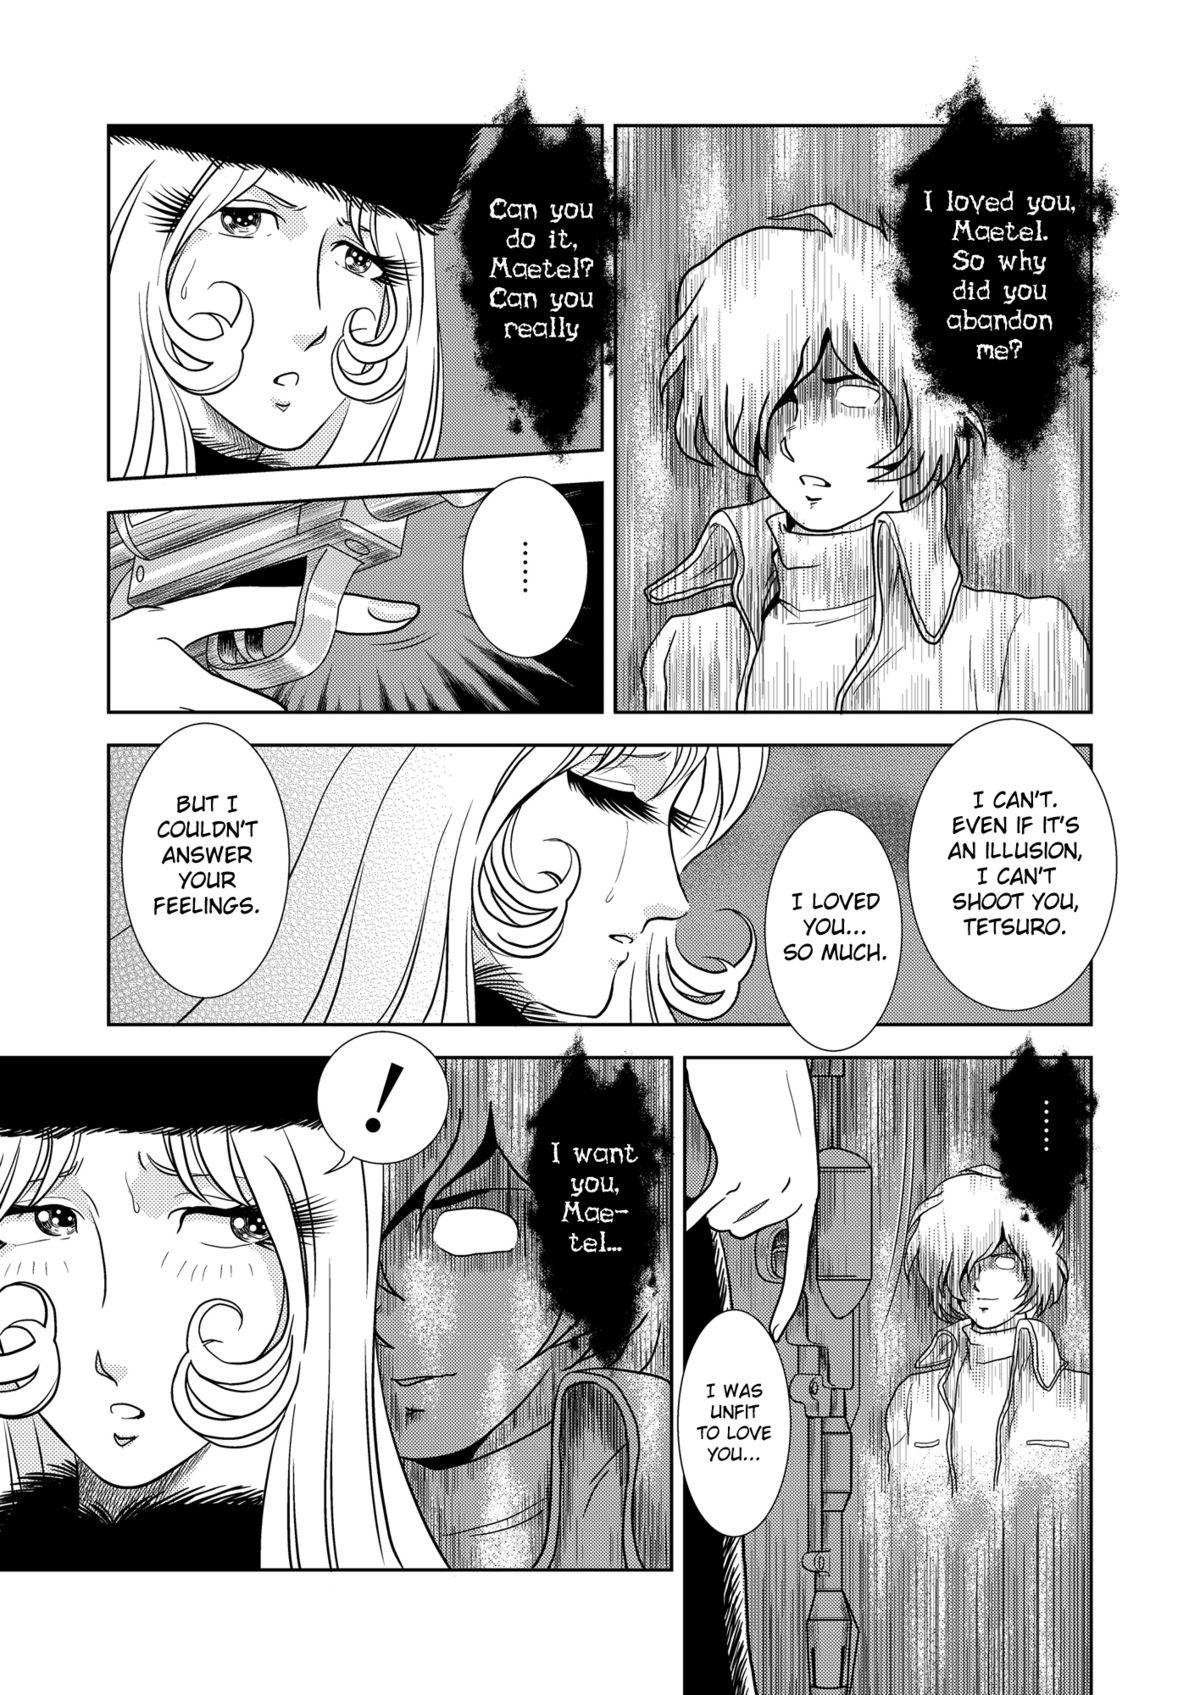 Mom Maetel Story - Galaxy express 999 Bisexual - Page 7